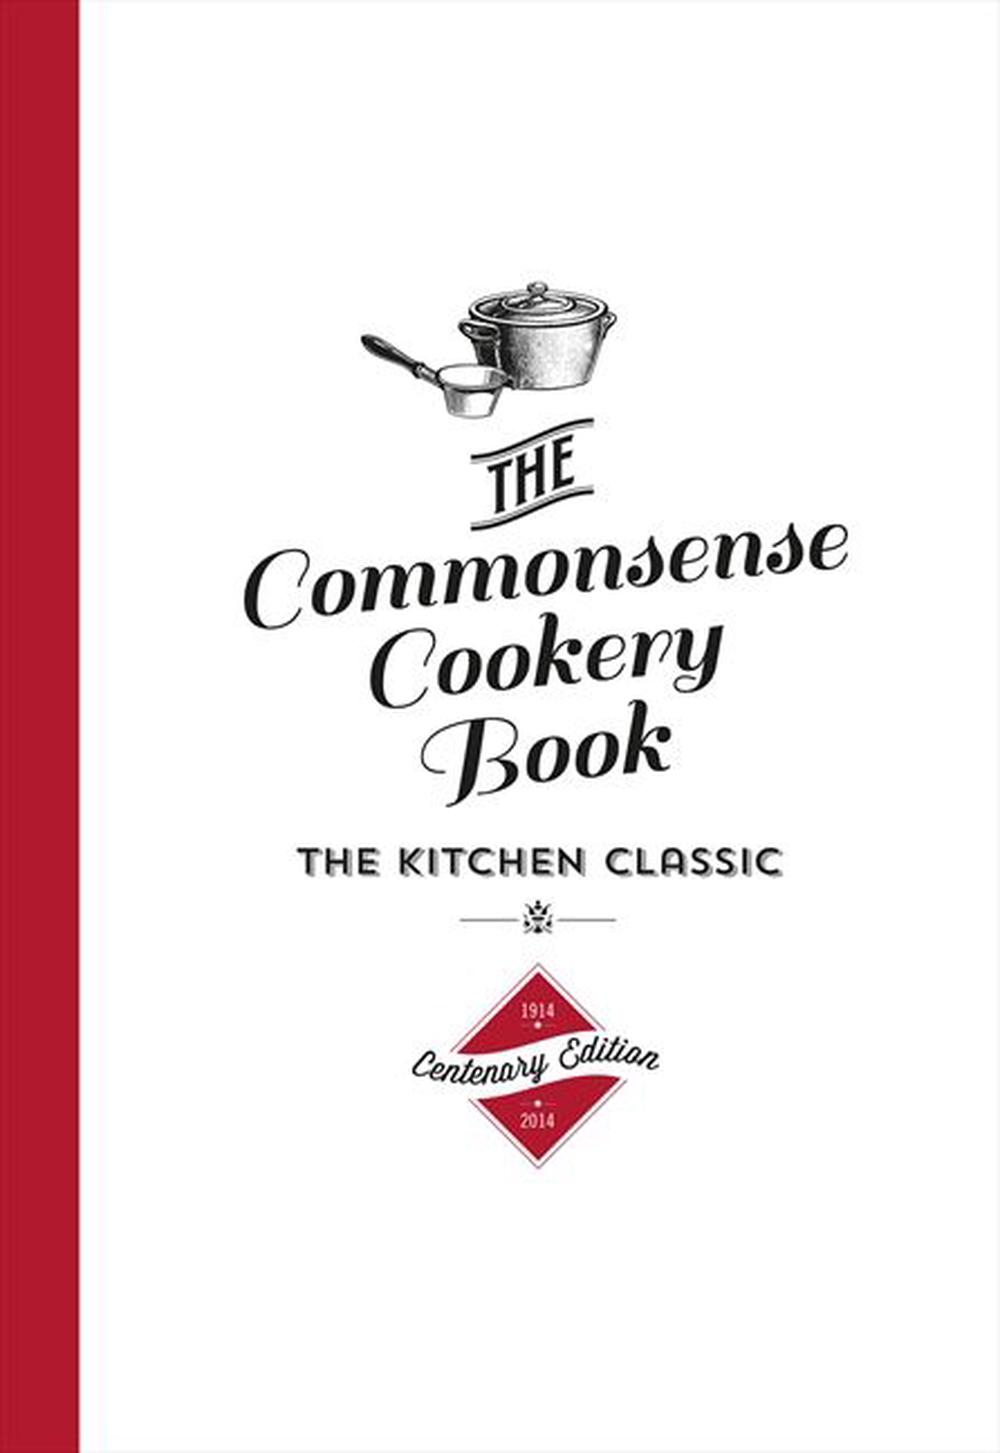 The Commonsense Cookery Book by Home Economics Institute of Australia